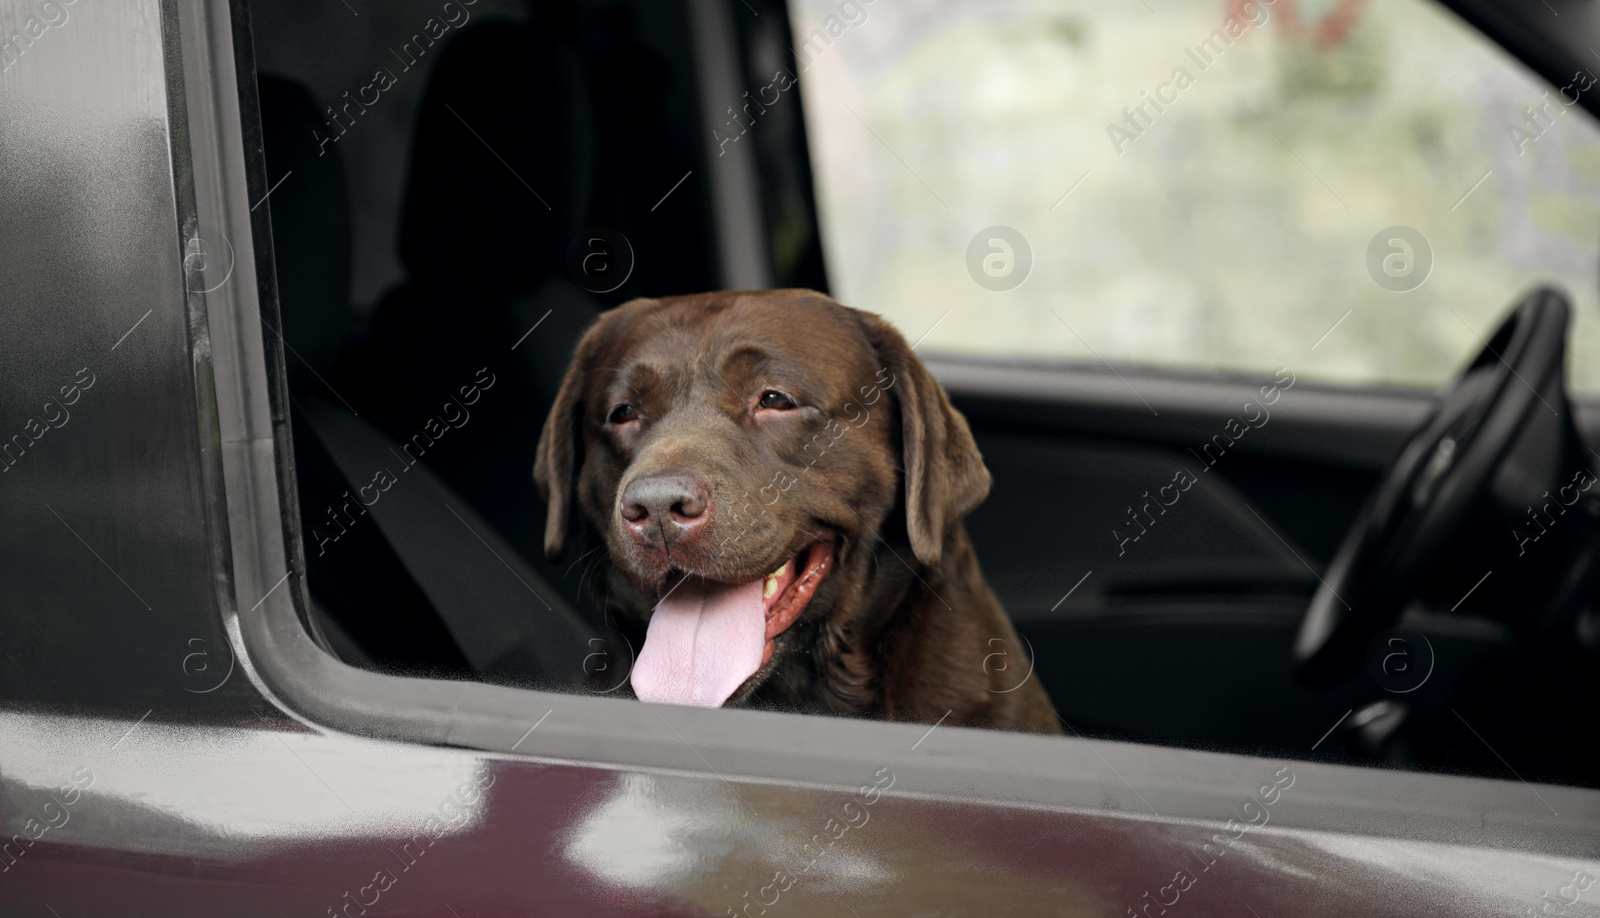 Photo of Funny Chocolate Labrador Retriever dog looking out of car window